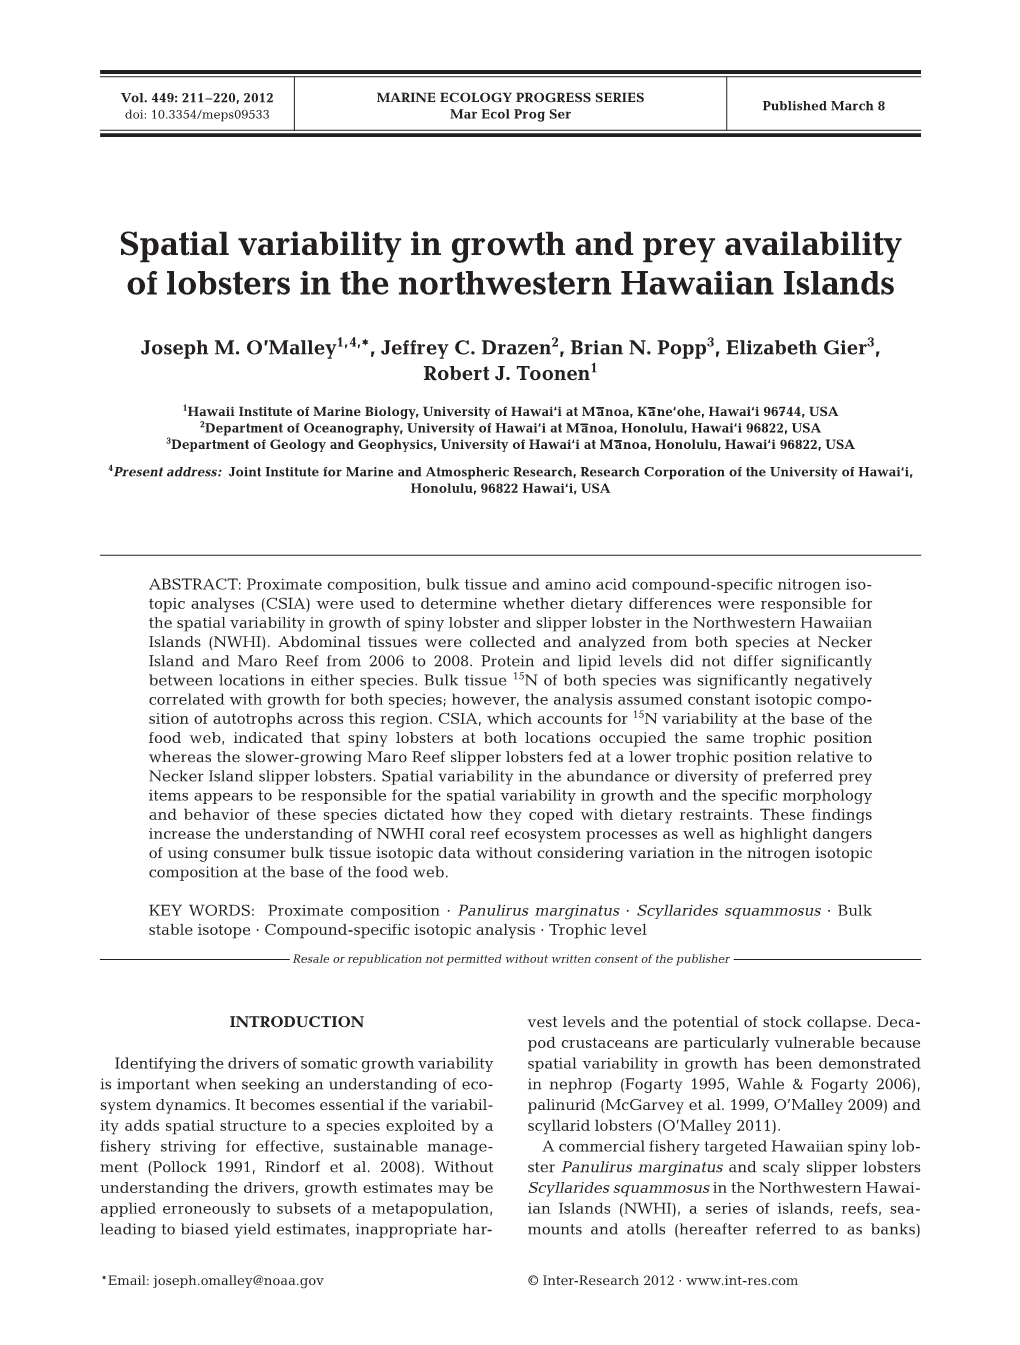 Spatial Variability in Growth and Prey Availability of Lobsters in the Northwestern Hawaiian Islands